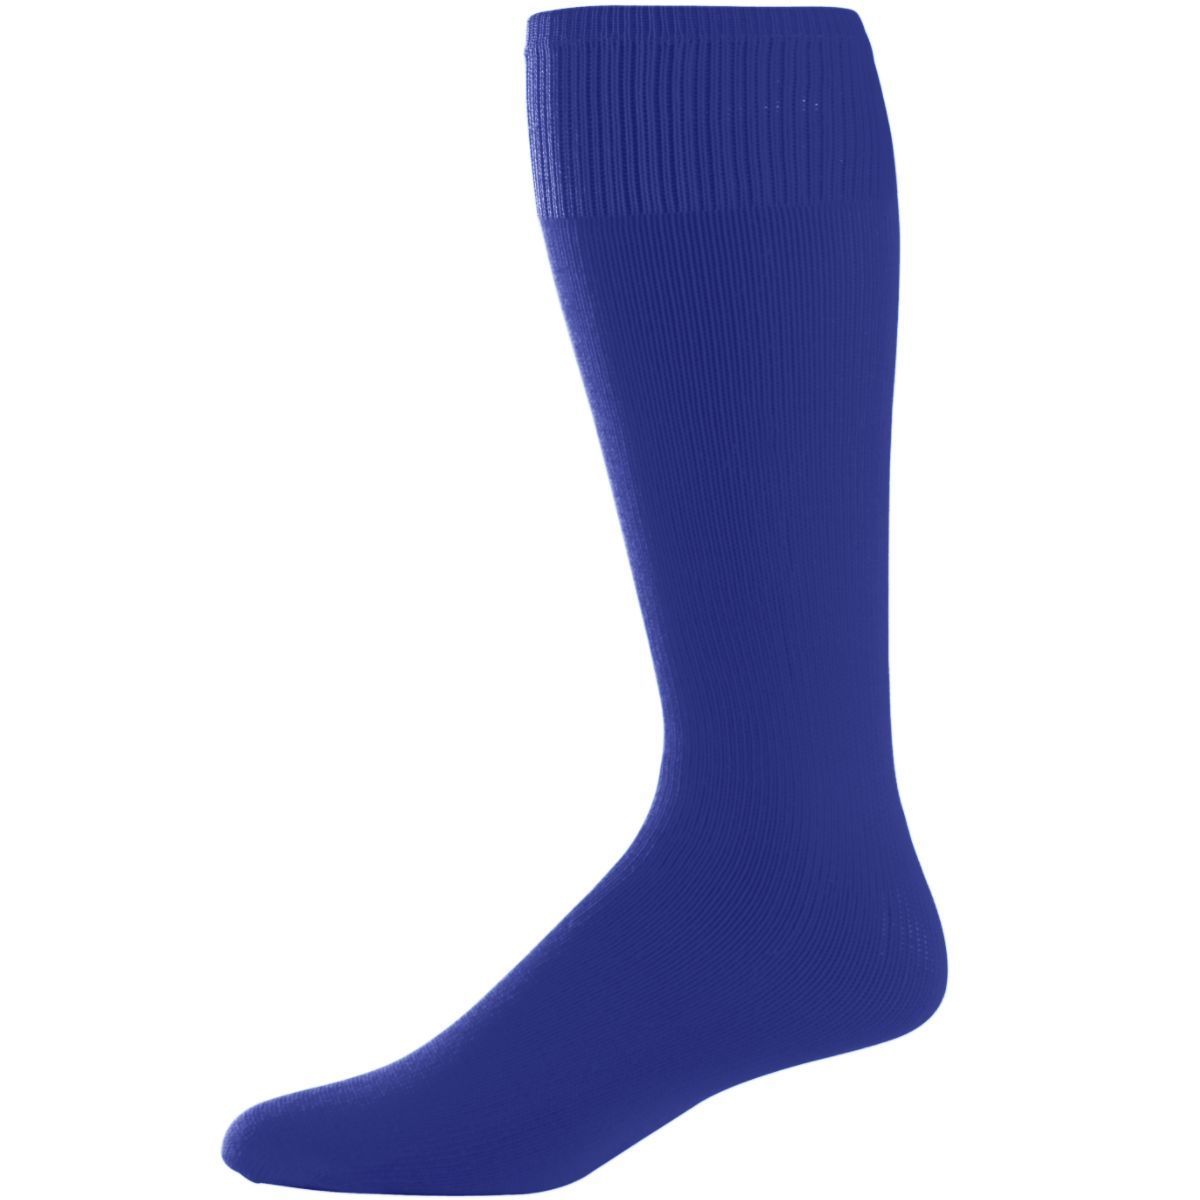 Augusta Sportswear Game Socks in Purple  -Part of the Accessories, Augusta-Products, Accessories-Socks product lines at KanaleyCreations.com